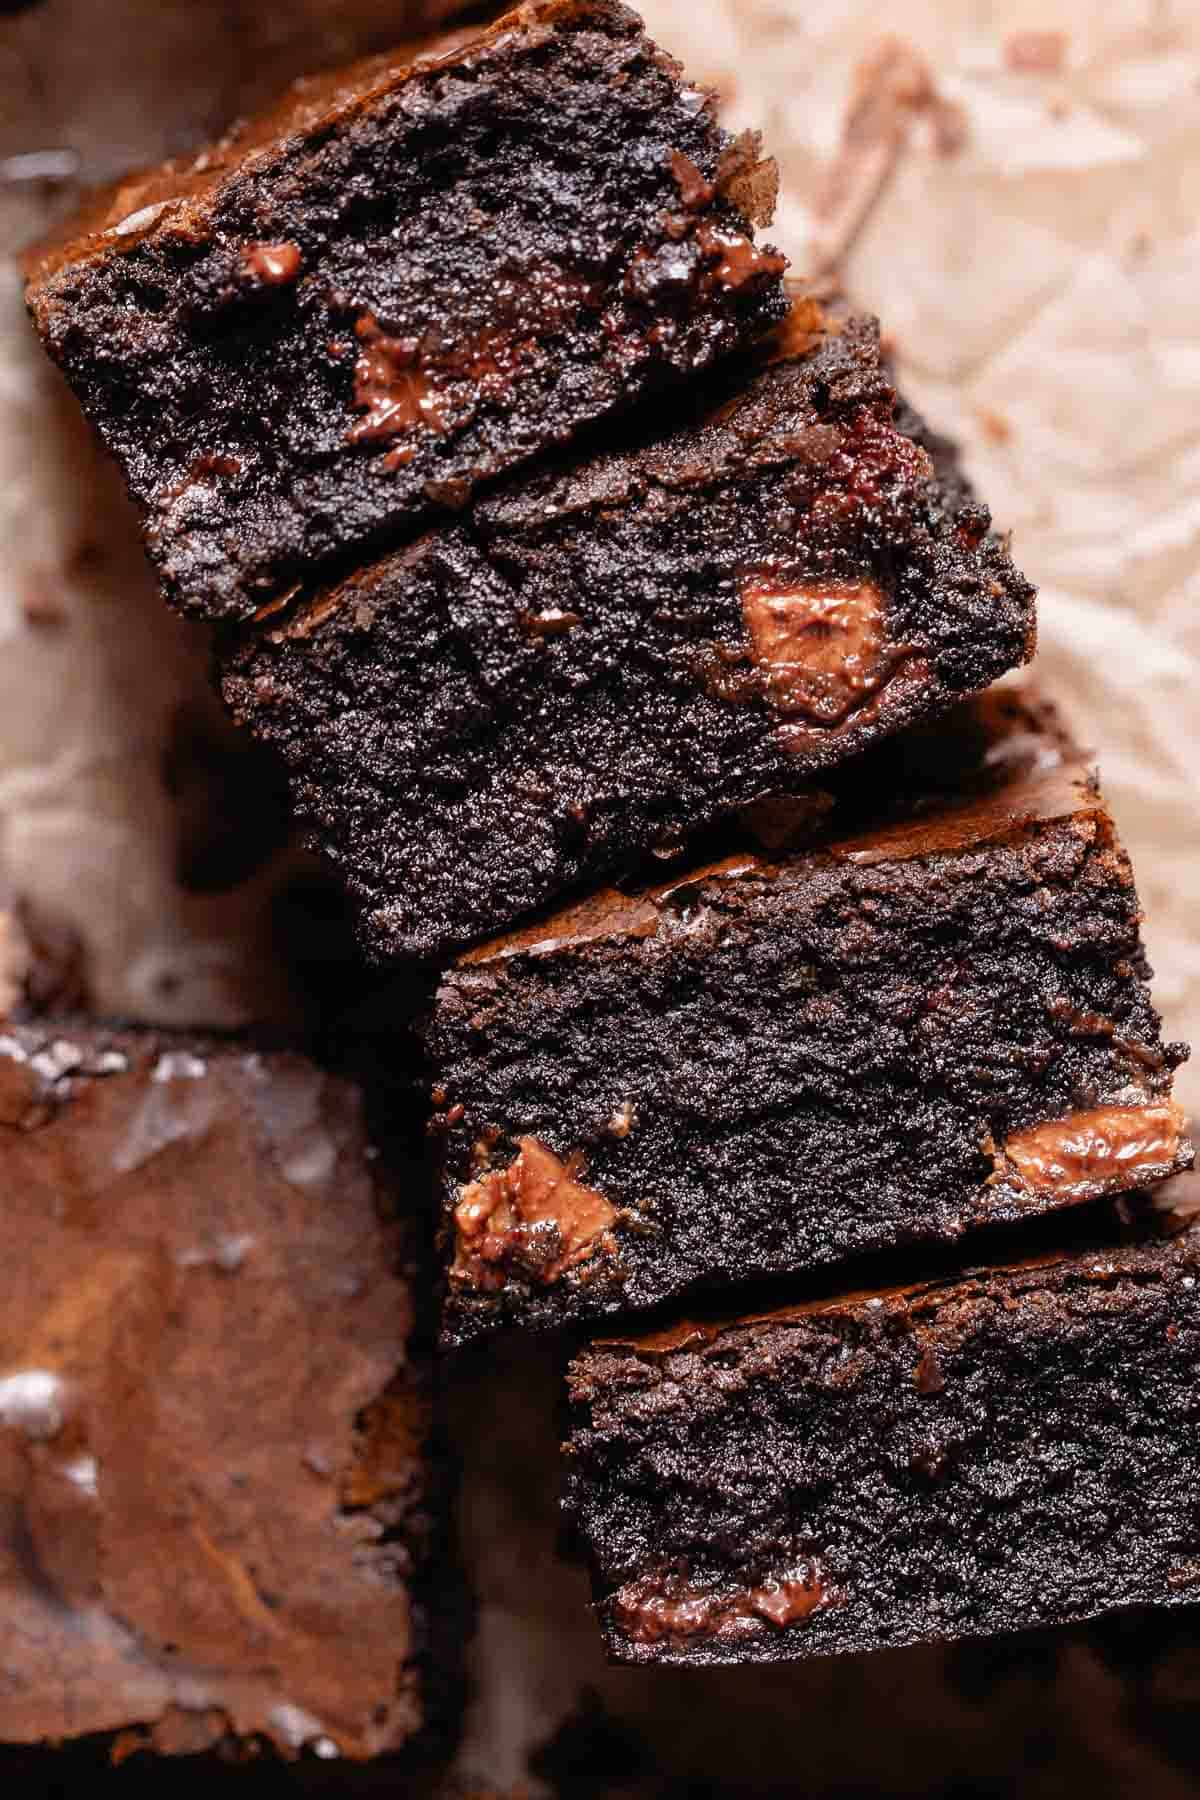 A stack of miso brownies on their sides to show the fudgy texture.